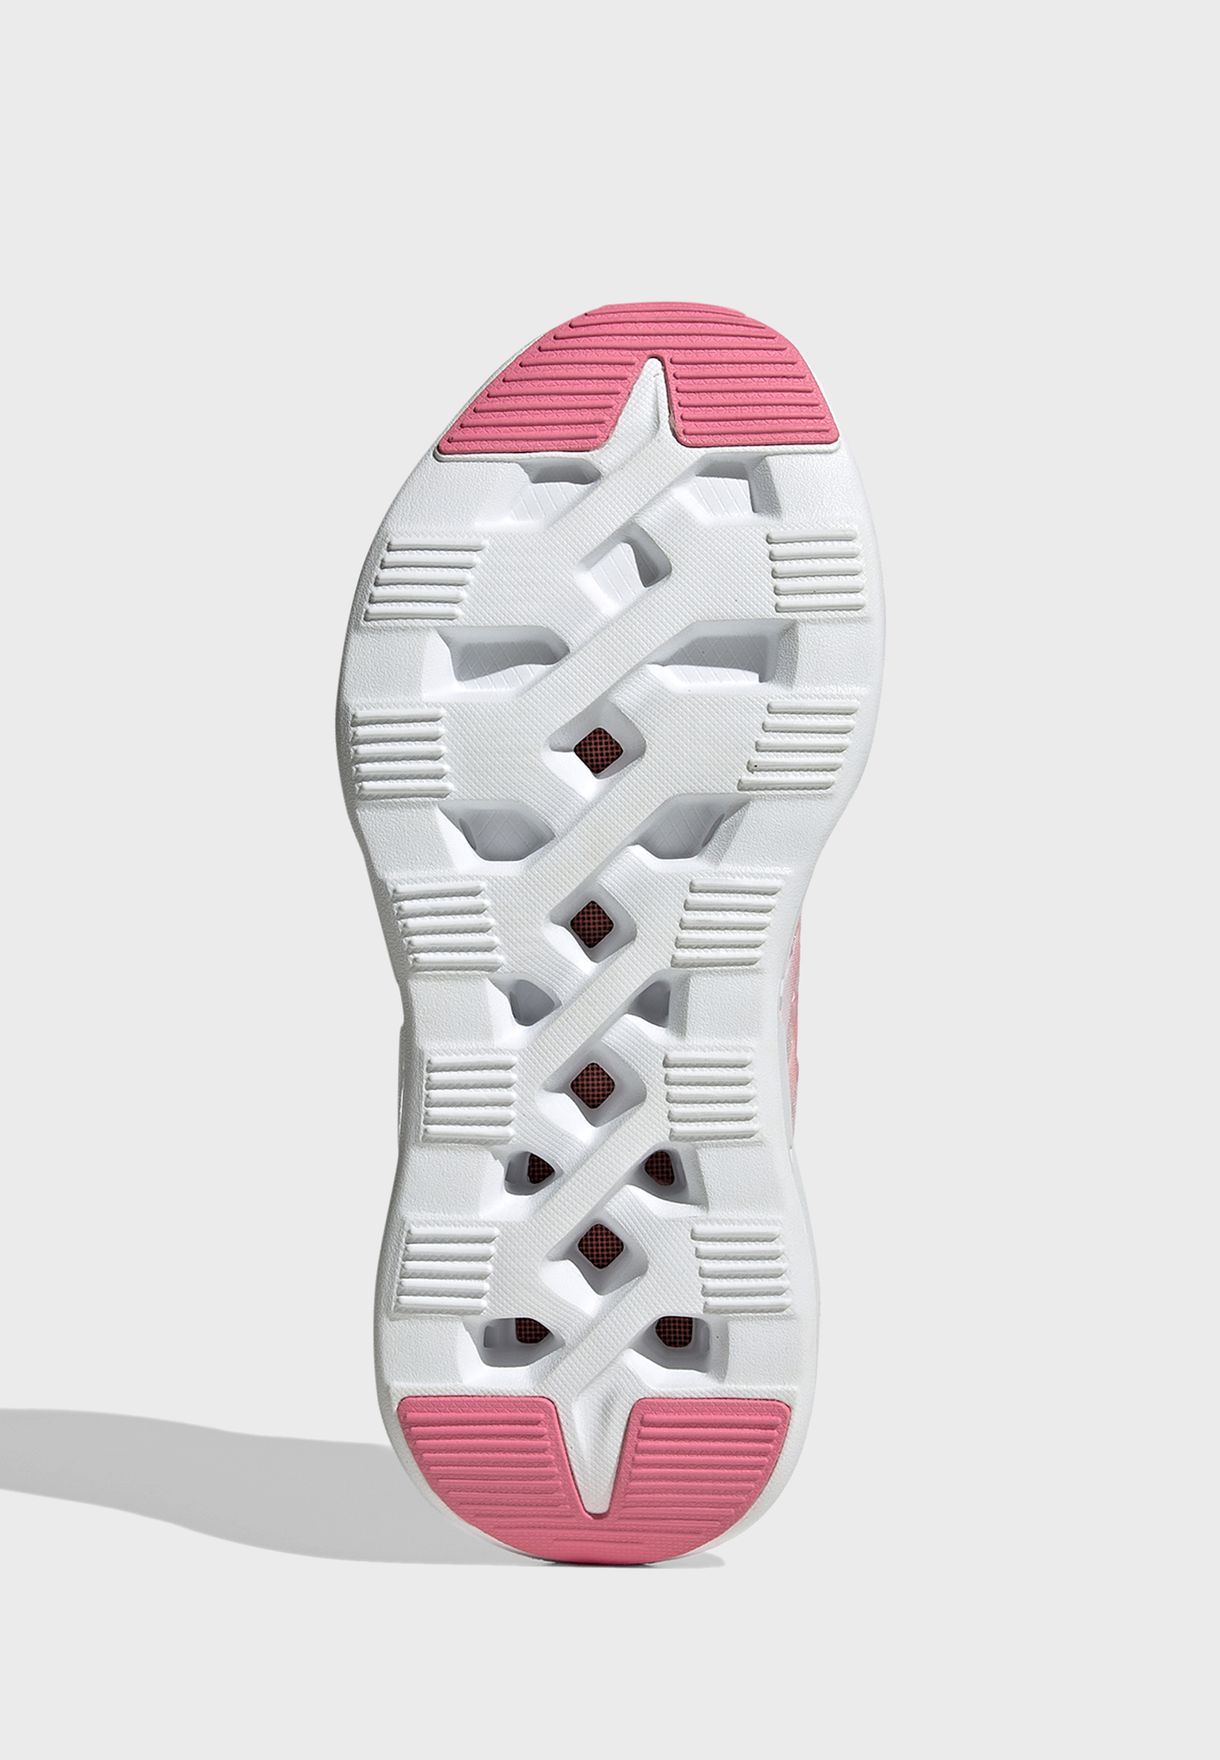 Ventice Climacool